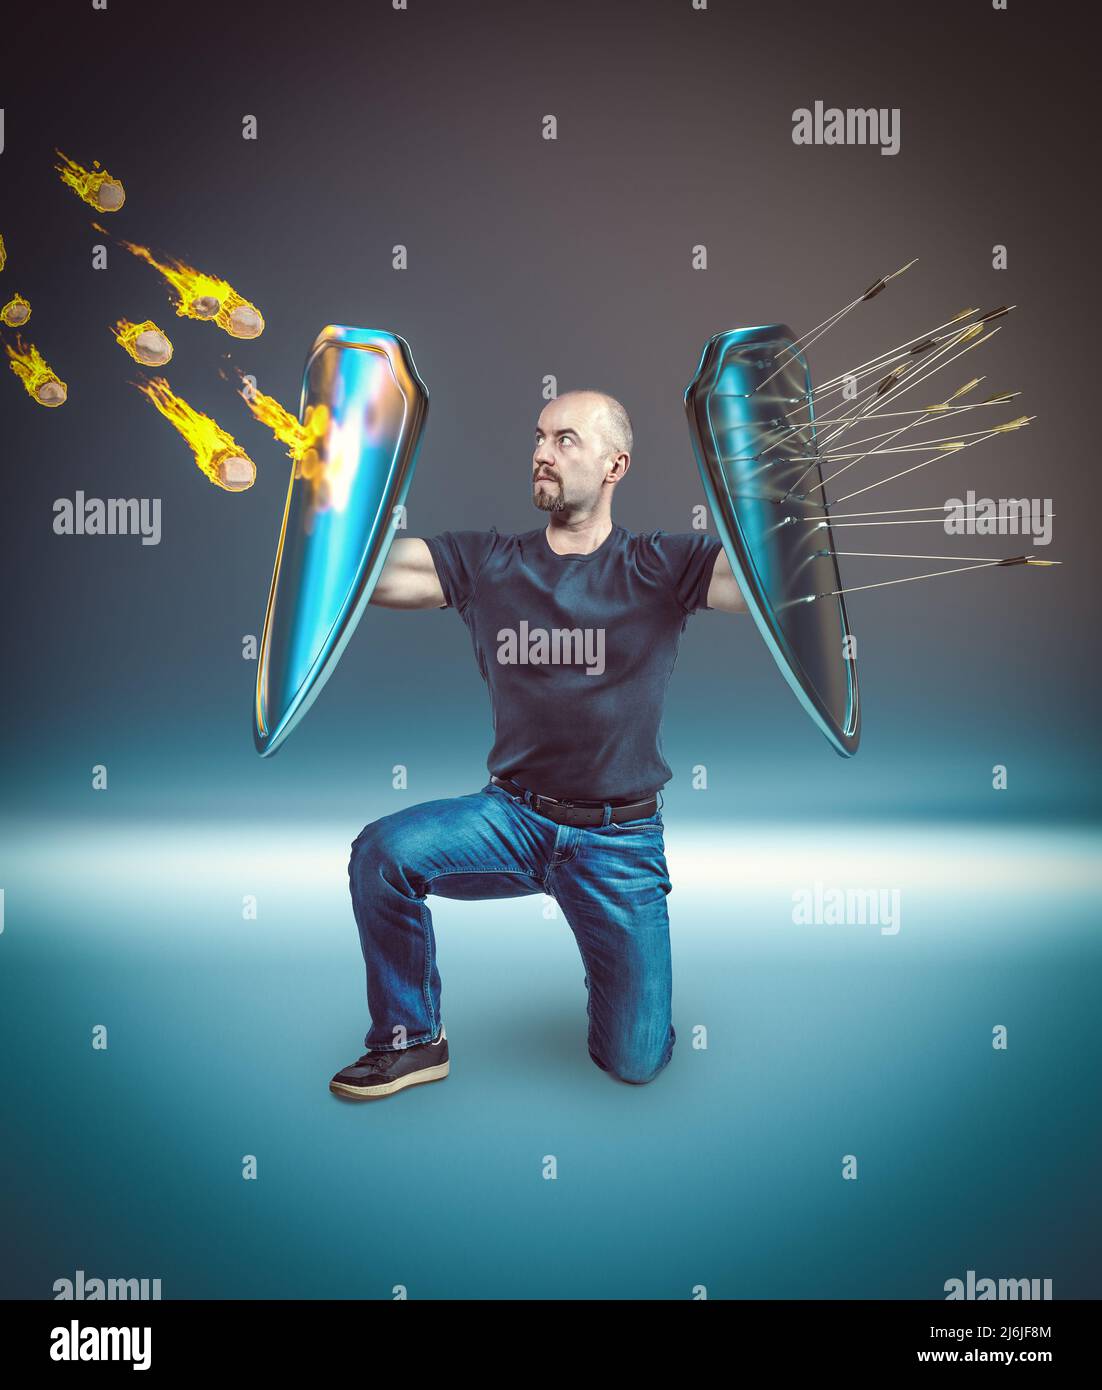 man with shields defends himself from simultaneous attacks Stock Photo